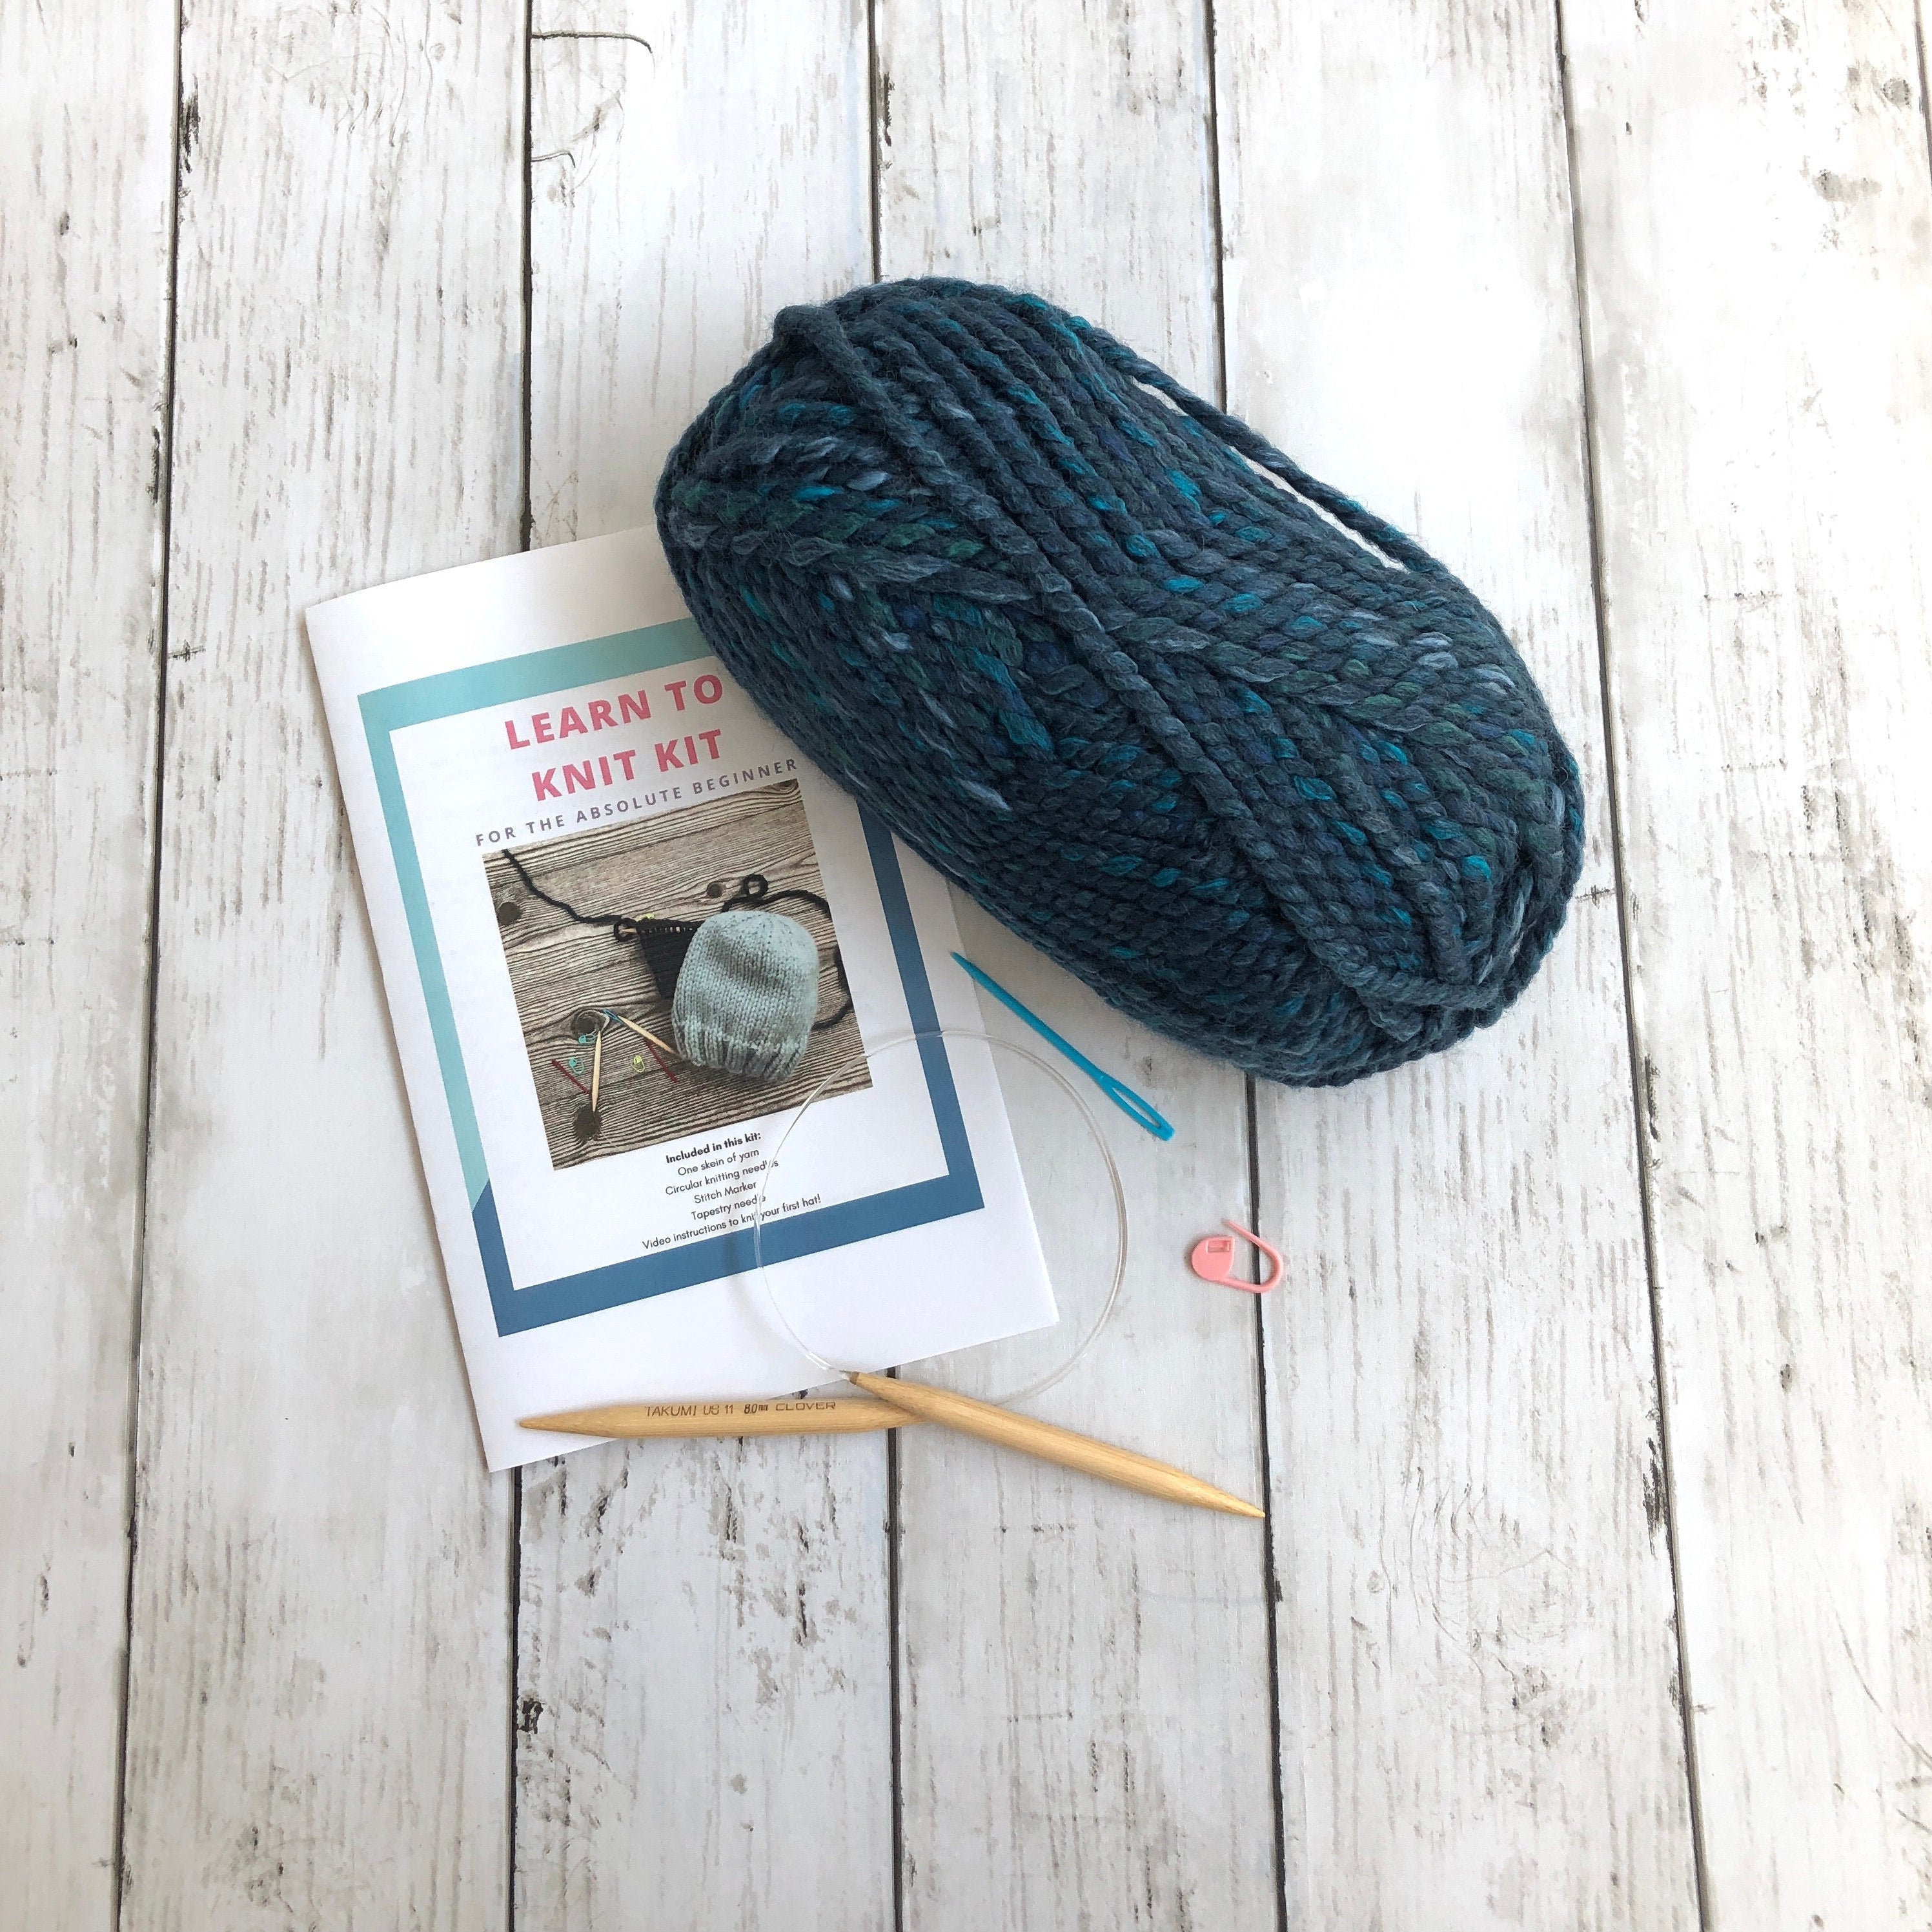 Knitting for Beginners Learn to Knit Kit, DIY Kits for Adults